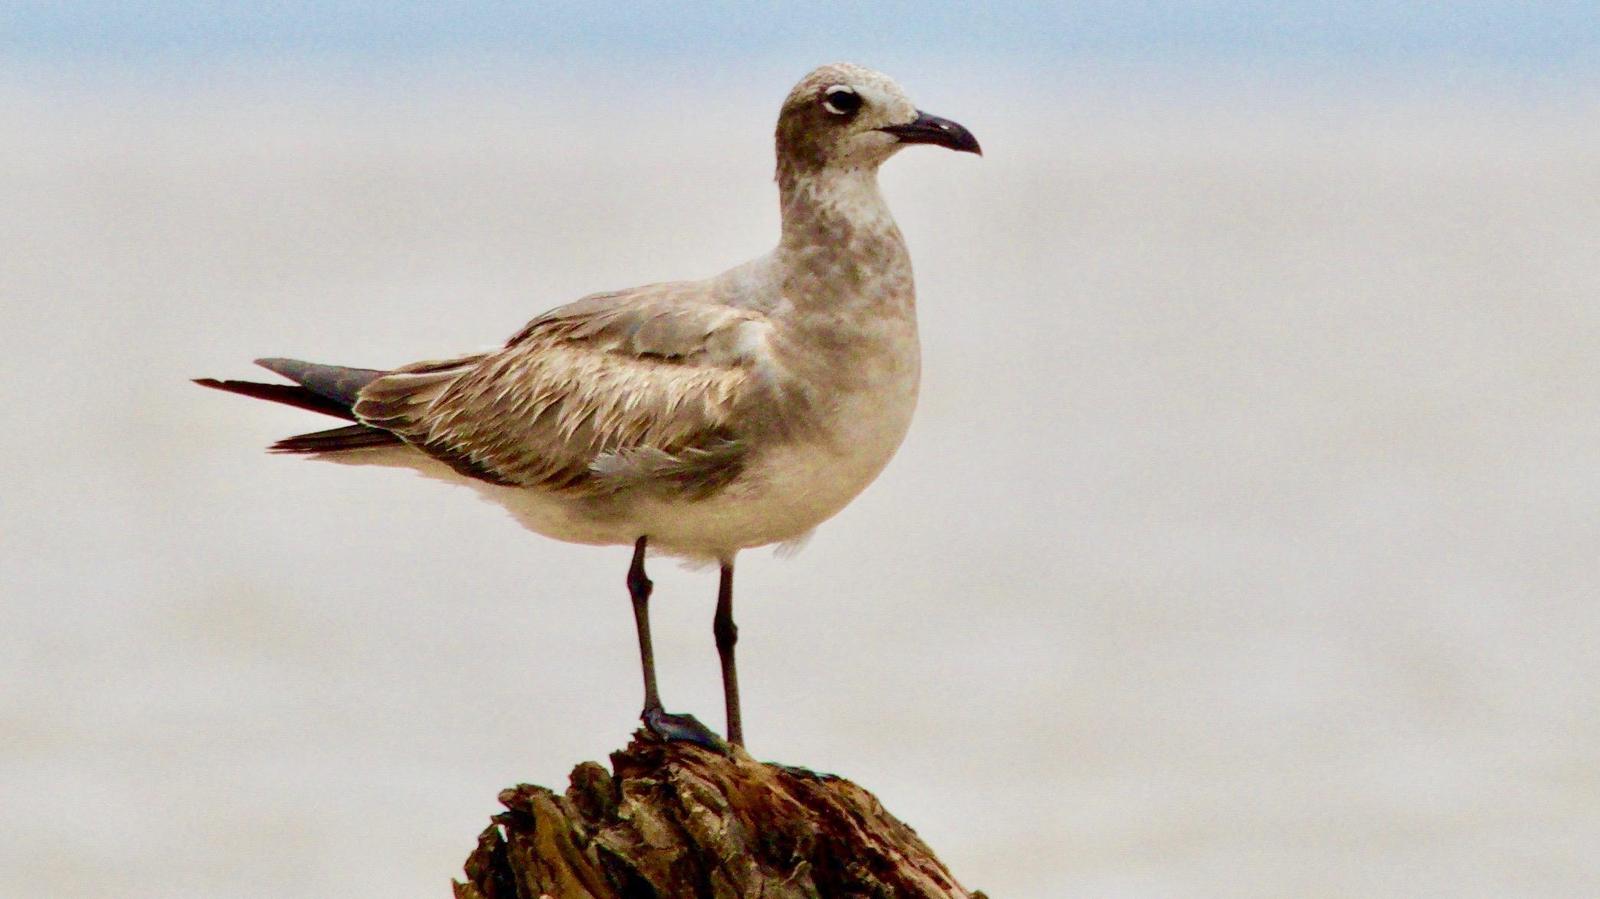 Laughing Gull Photo by Susan Leverton